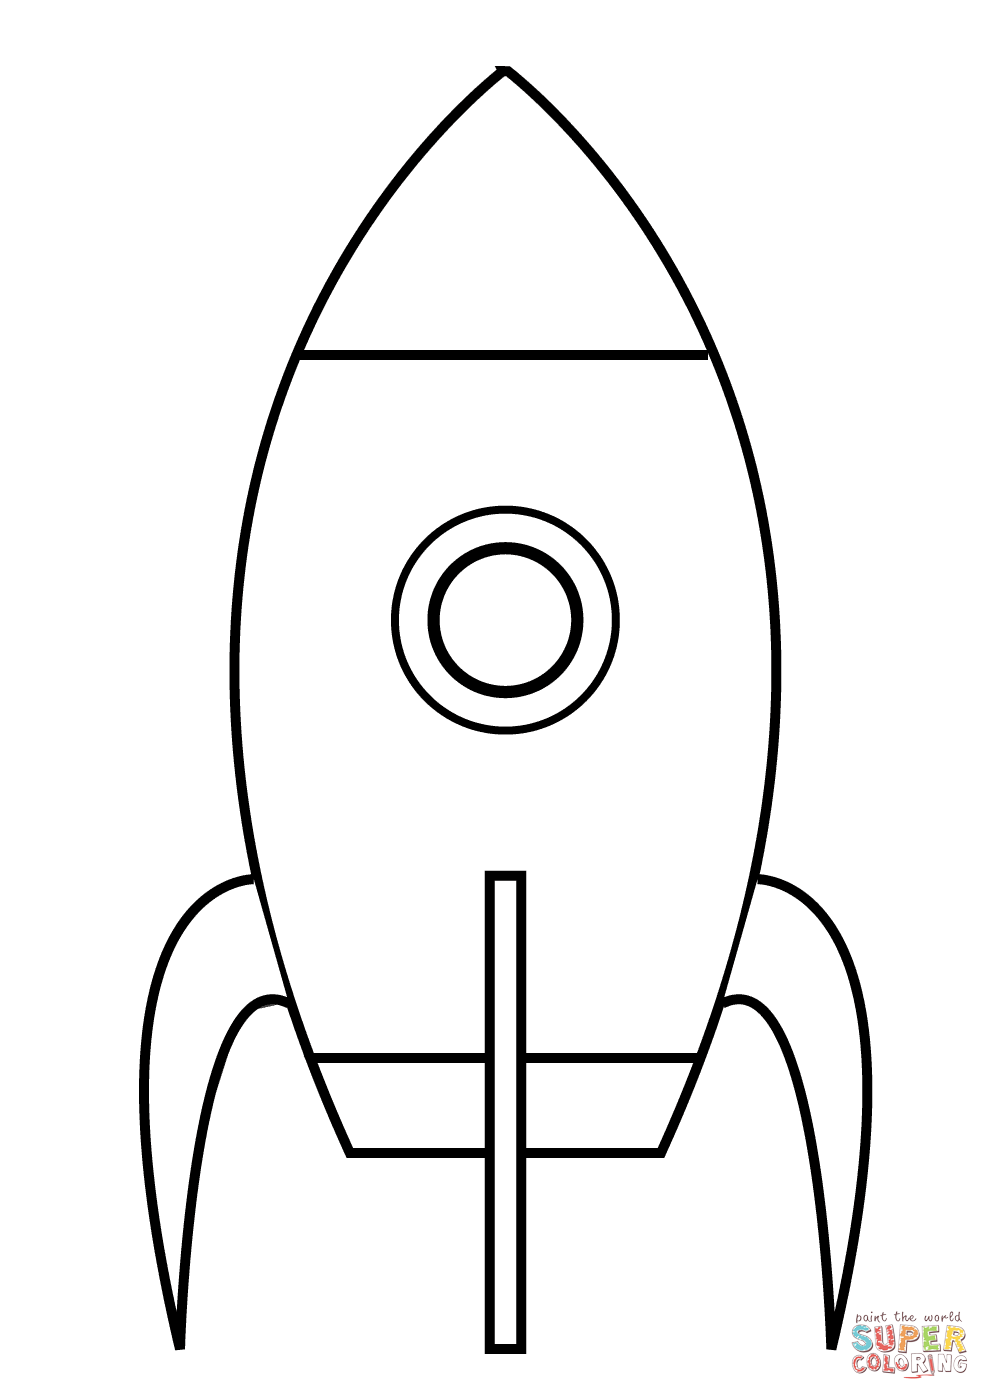 Very Simple Rocket coloring page | Free Printable Coloring Pages